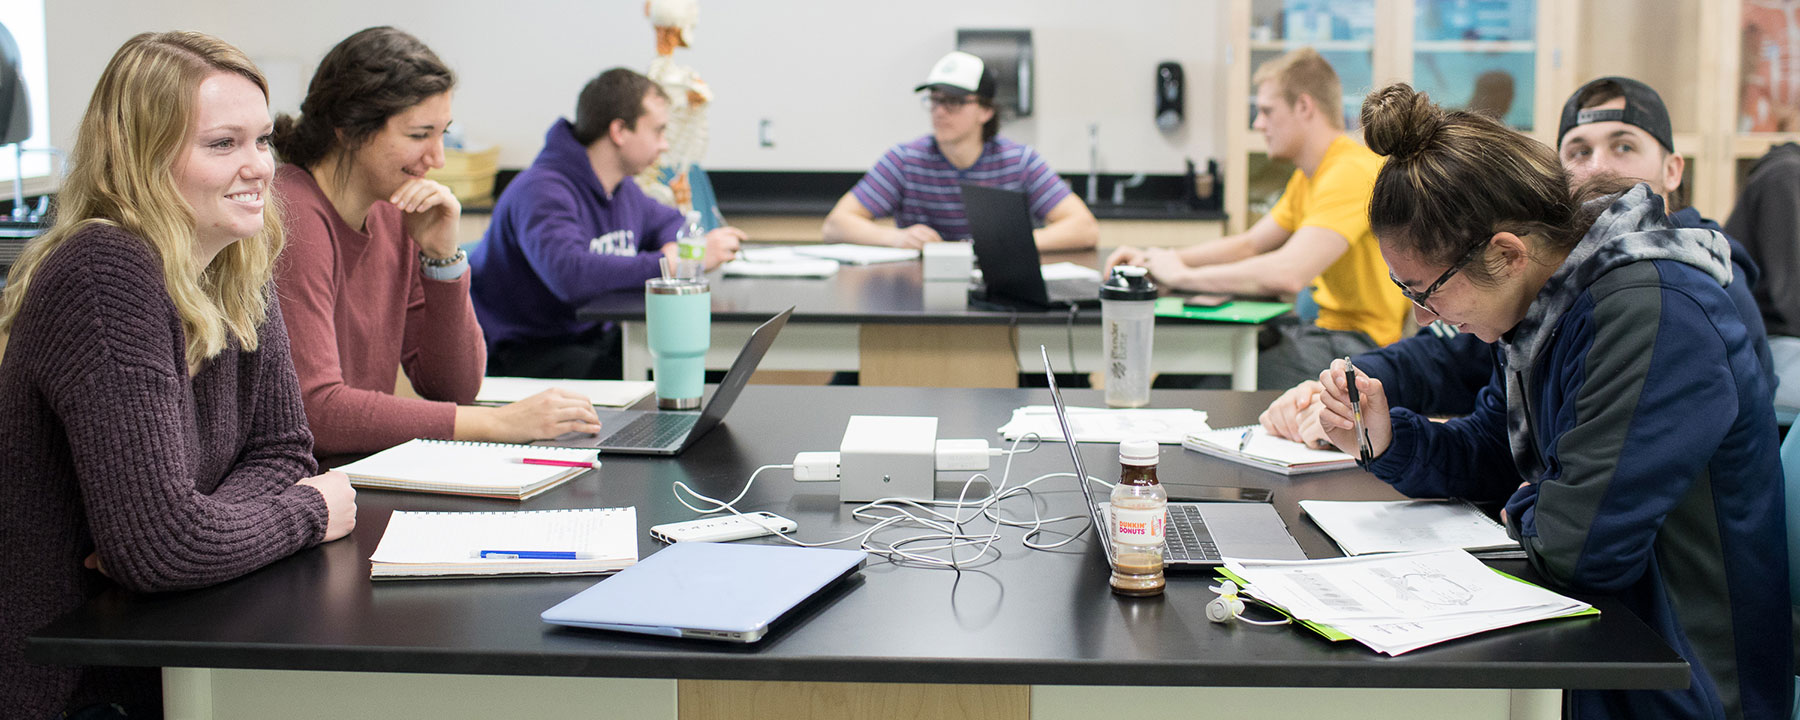 Students in a science classroom at Cornell College